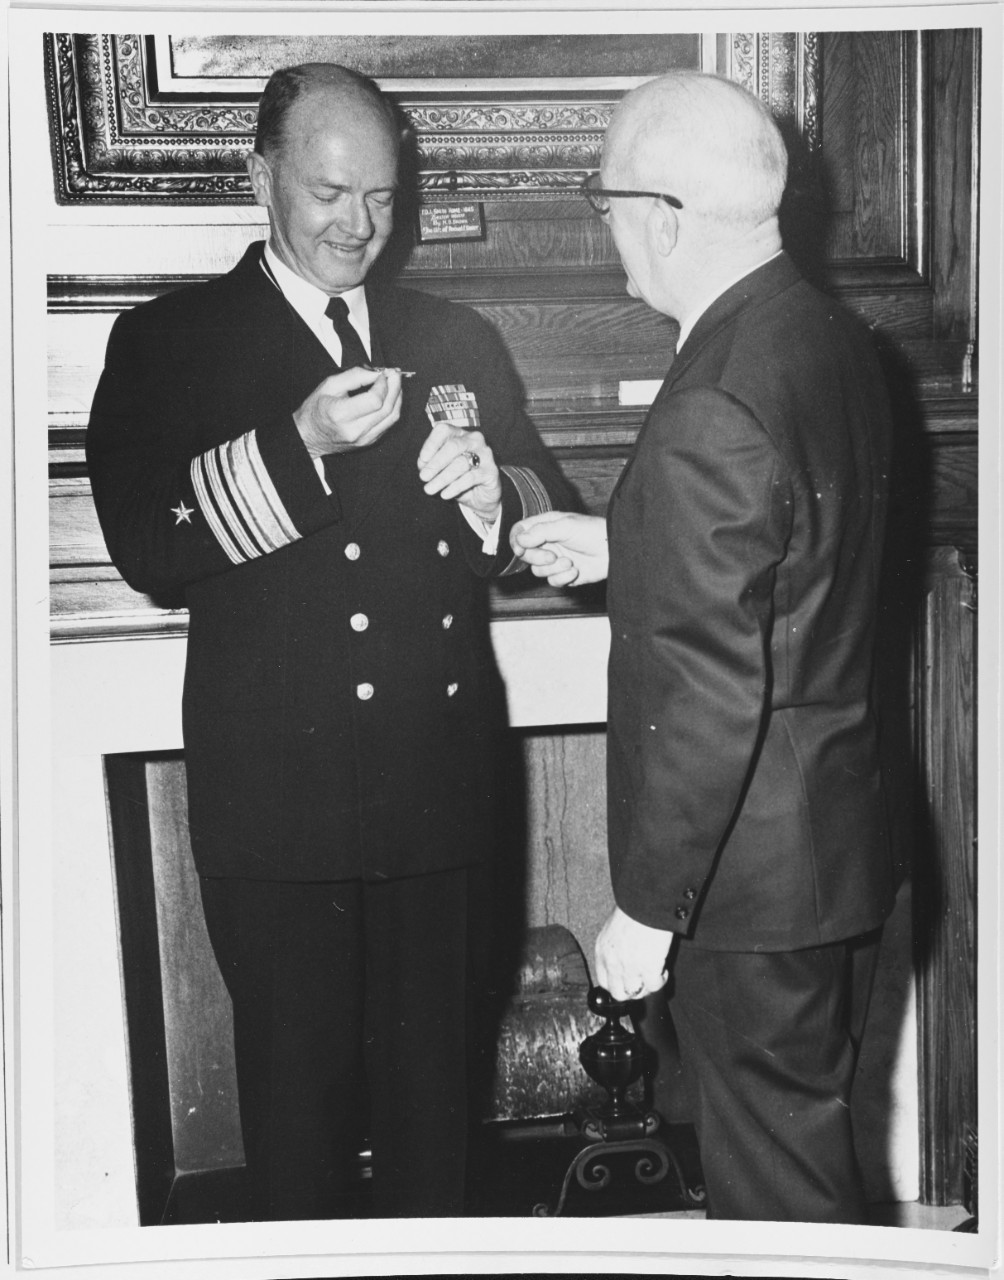 Vice Admiral Taylor receives the key to the city from the Council Chairman at USS PORTLAND Memorial ceremonies, July 4, 1962